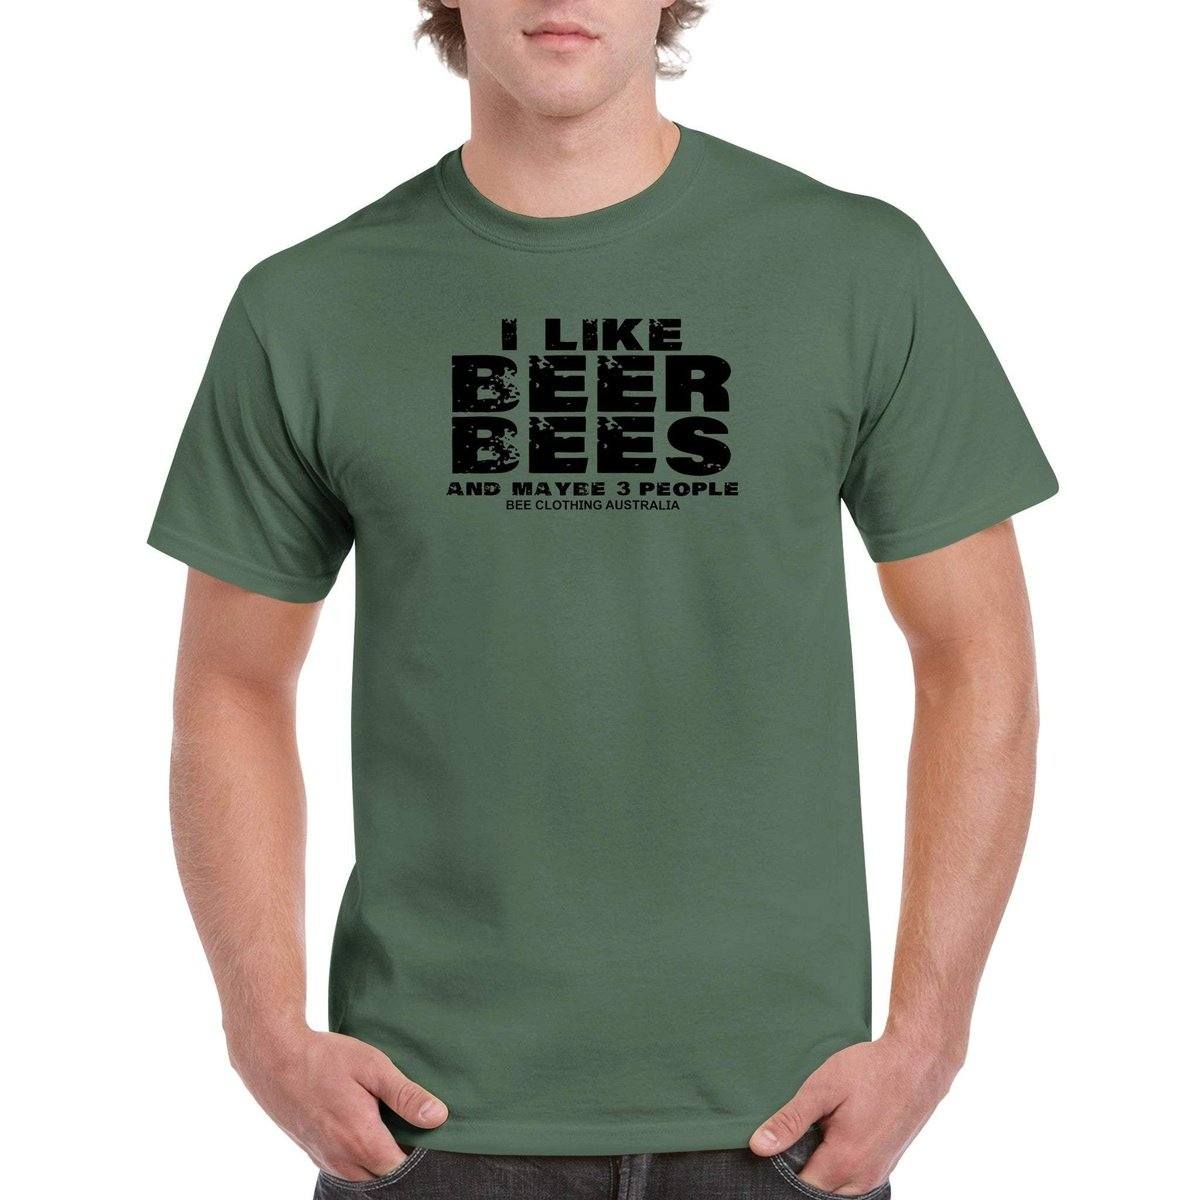 I Like Bees Beer And Maybe 3 People T-Shirt - beekeeper slogan Tshirt - Unisex Crewneck T-shirt Australia Online Color Military Green / S